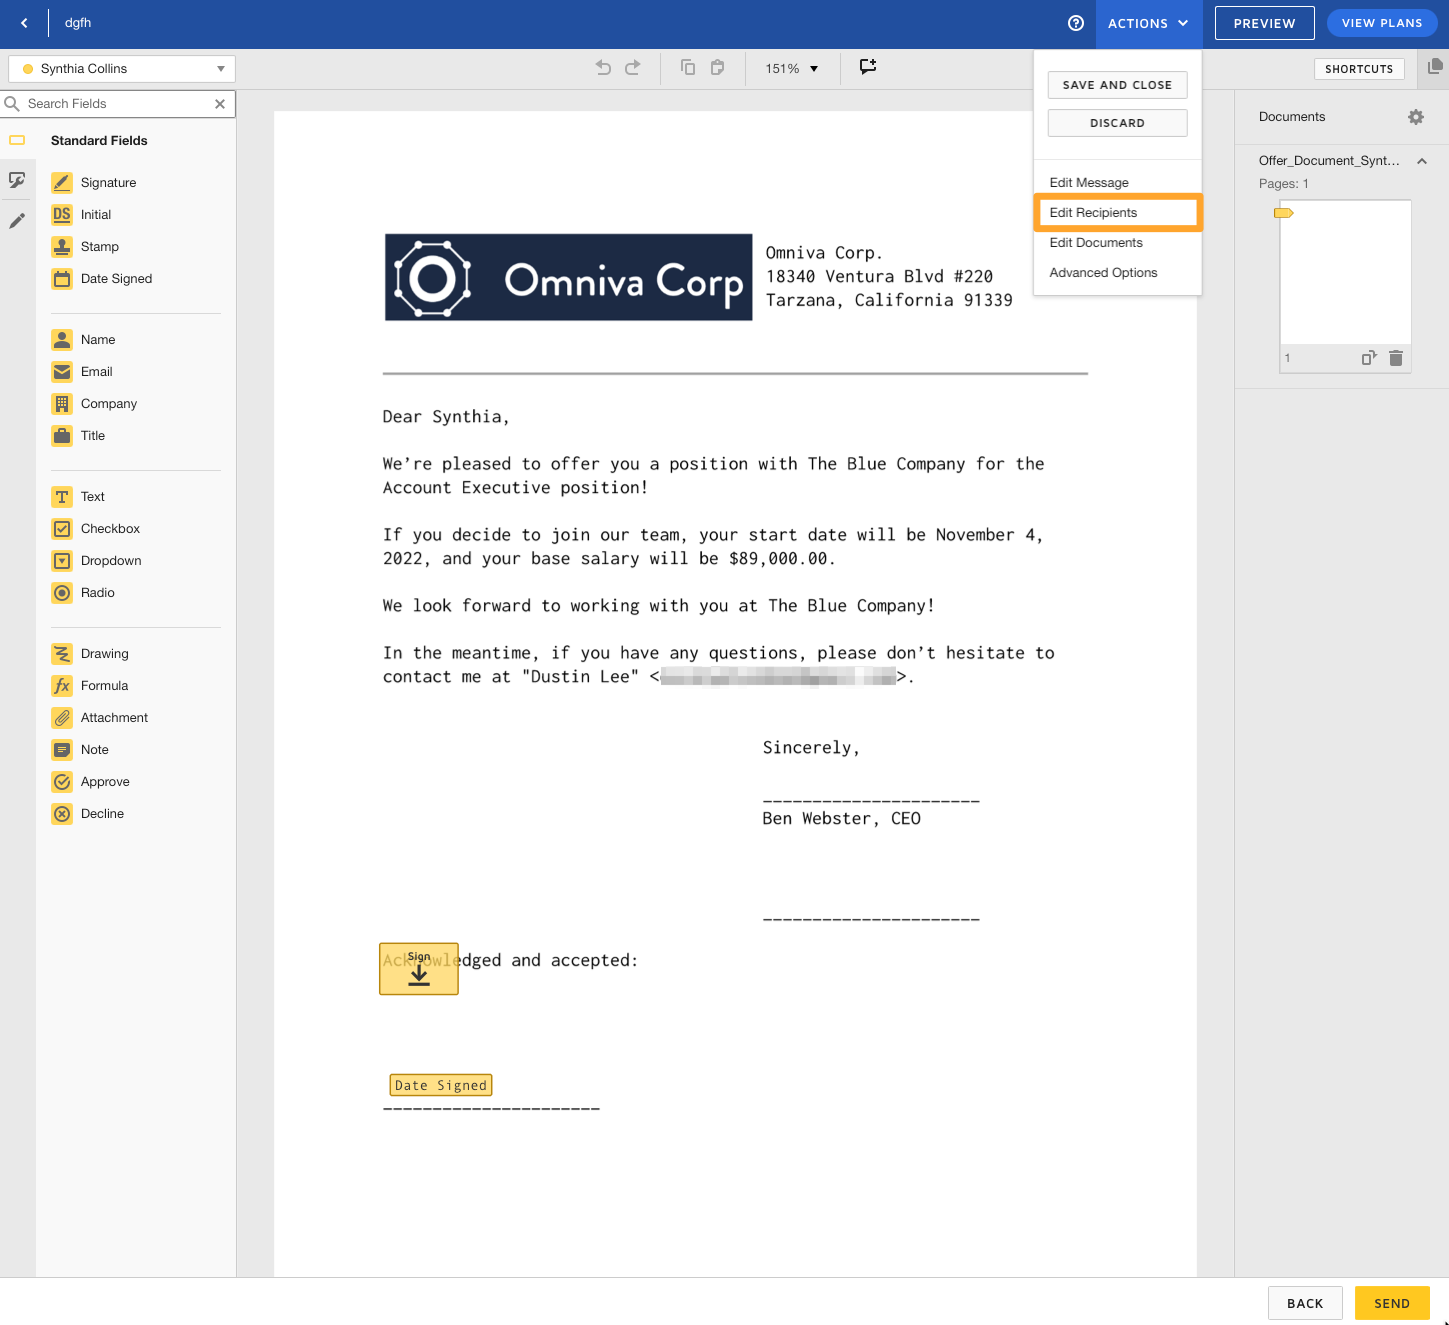 An example offer letter from Omniva Corp is shown on DocuSign with the Actions, Edit Recipients button highlighted in marigold at the top right